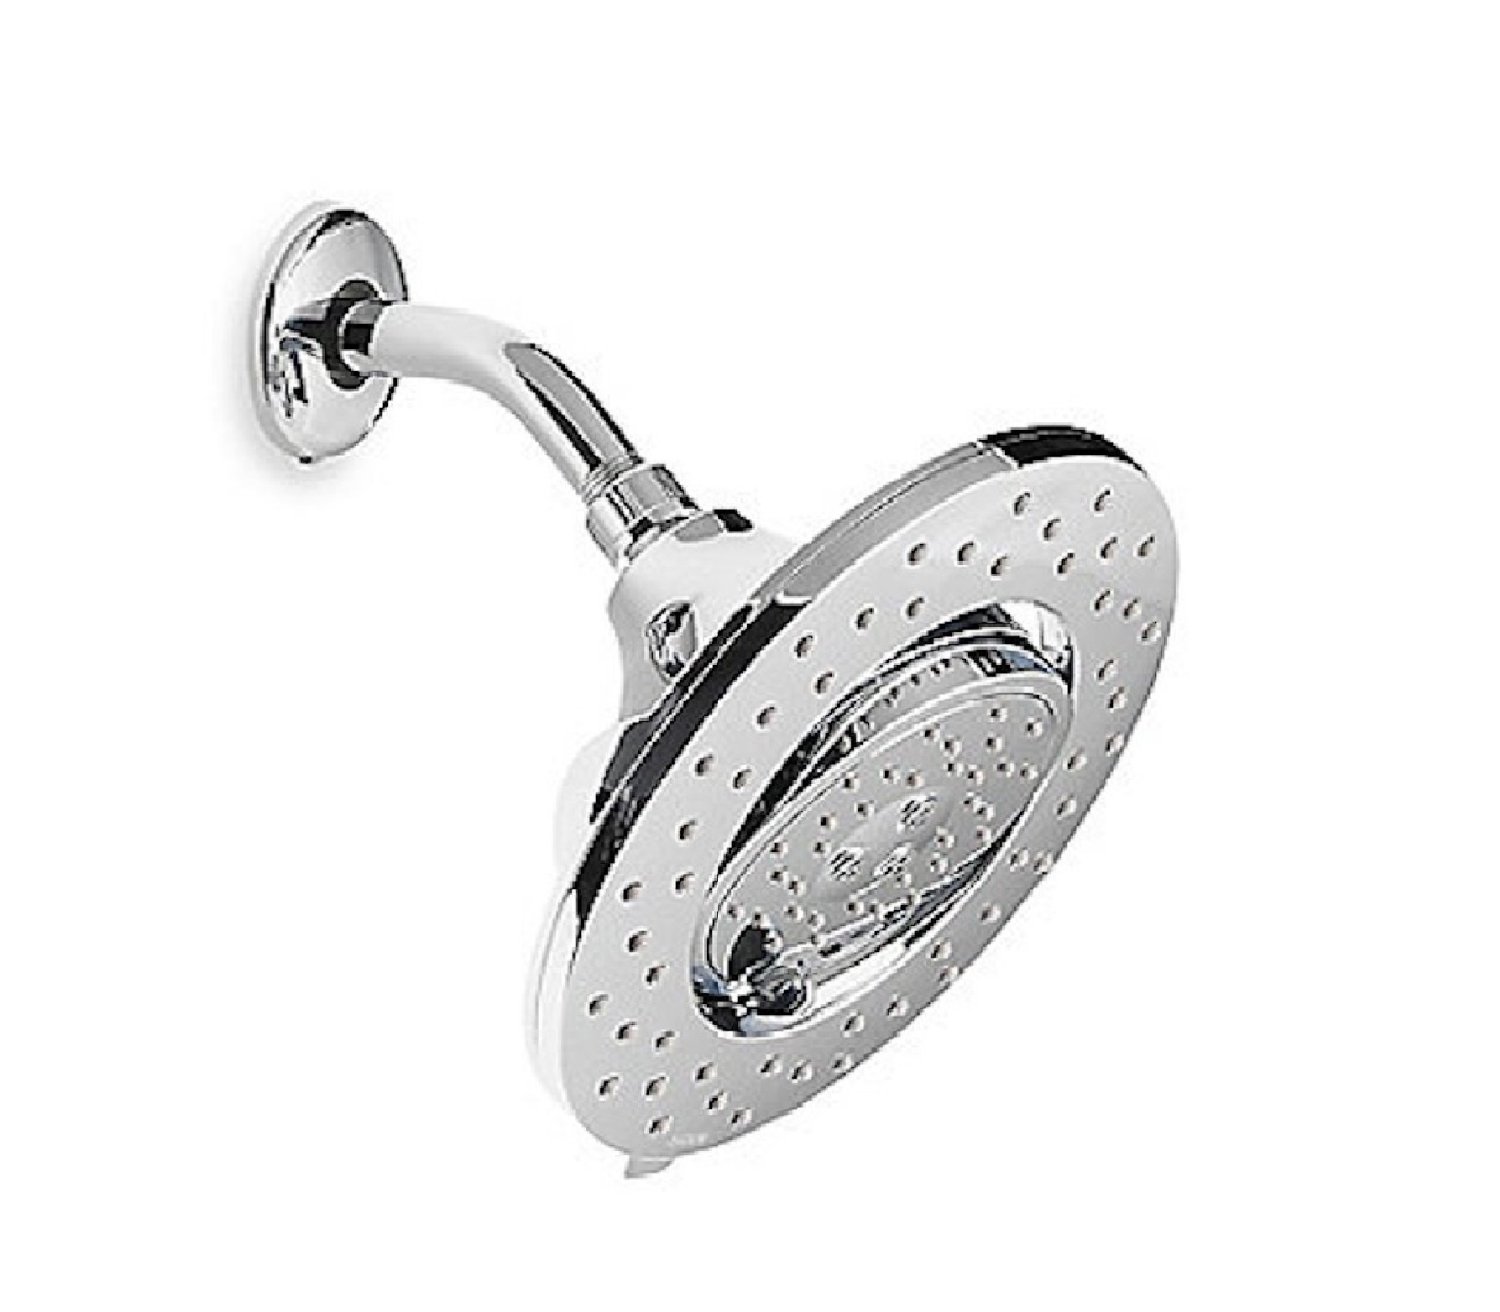 Moen 26017 2.5 GPM Rain Shower Head from the Halo Collection